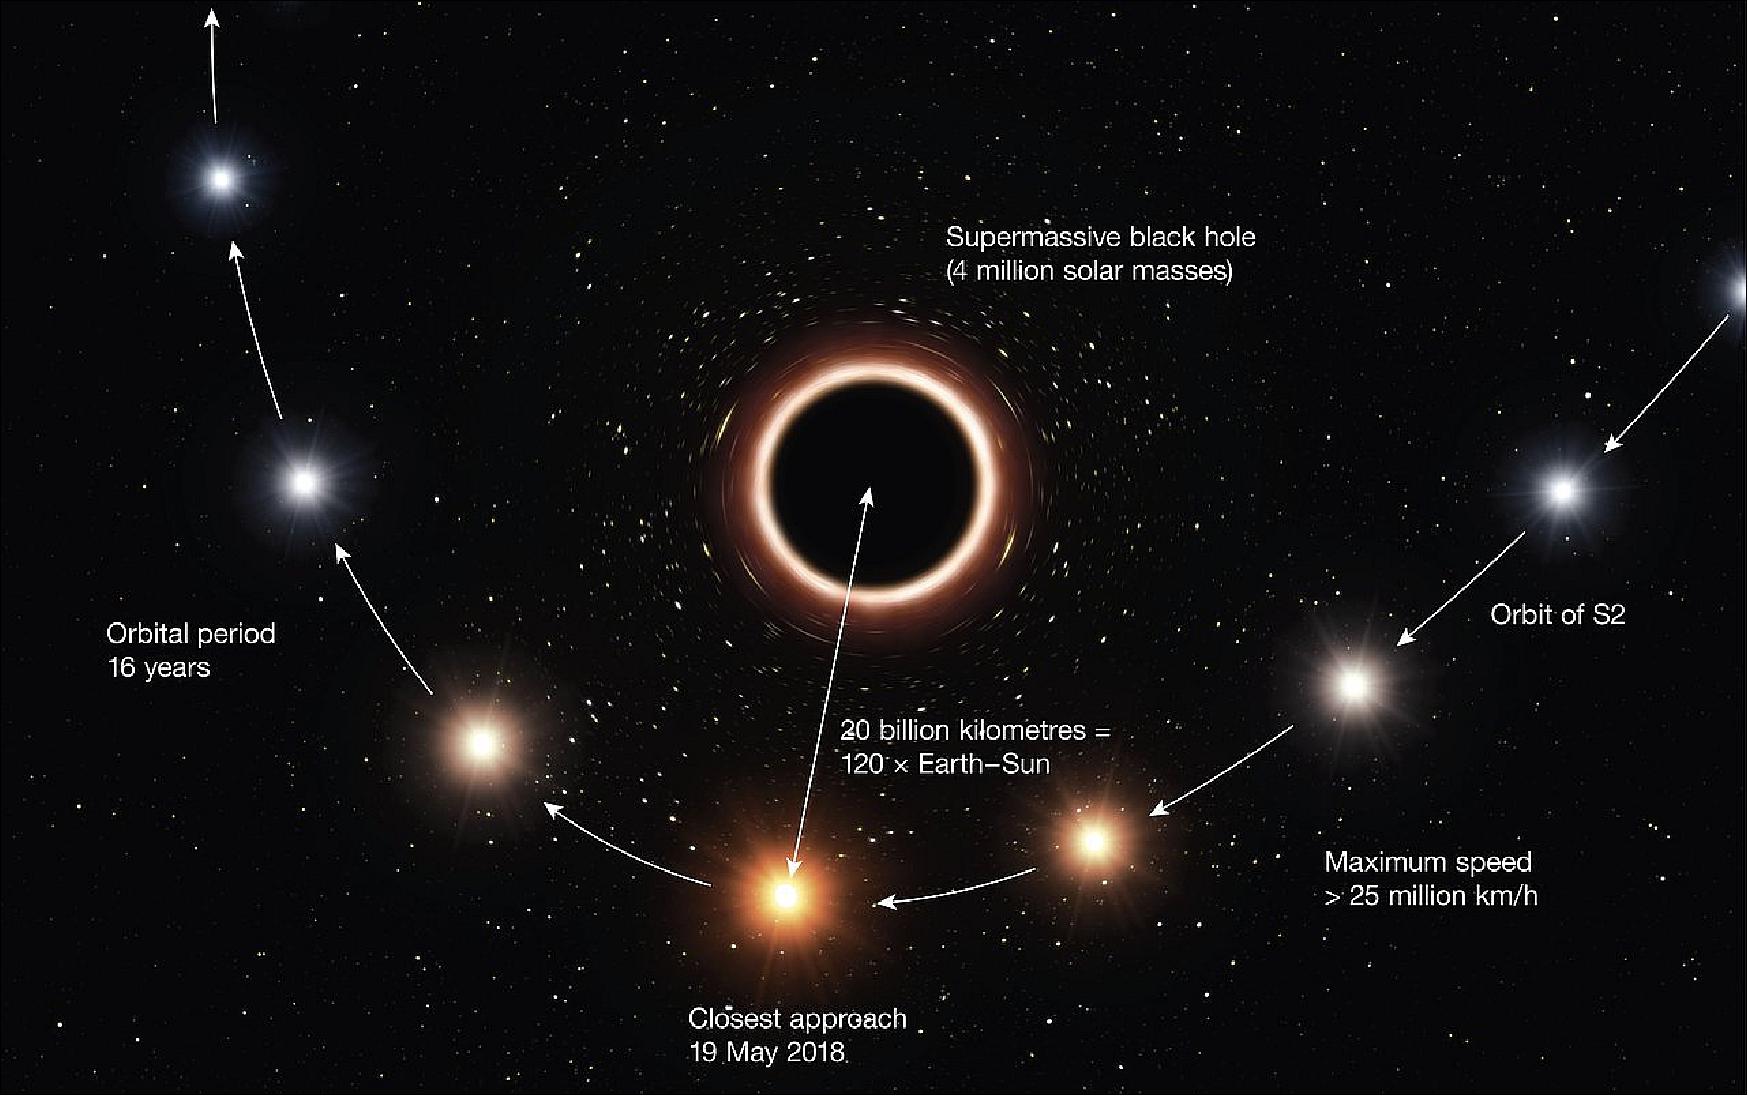 Figure 64: Artist’s impression of S2 passing supermassive black hole at the center of the Milky Way. Observations made with ESO’s VLT (Very Large Telescope) have for the first time revealed the effects predicted by Einstein’s general relativity on the motion of a star passing through the extreme gravitational field near the supermassive black hole in the center of the Milky Way. This long-sought result represents the climax of a 26-year-long observation campaign using ESO’s telescopes in Chile (image credit: ESO, M. Kommesser)